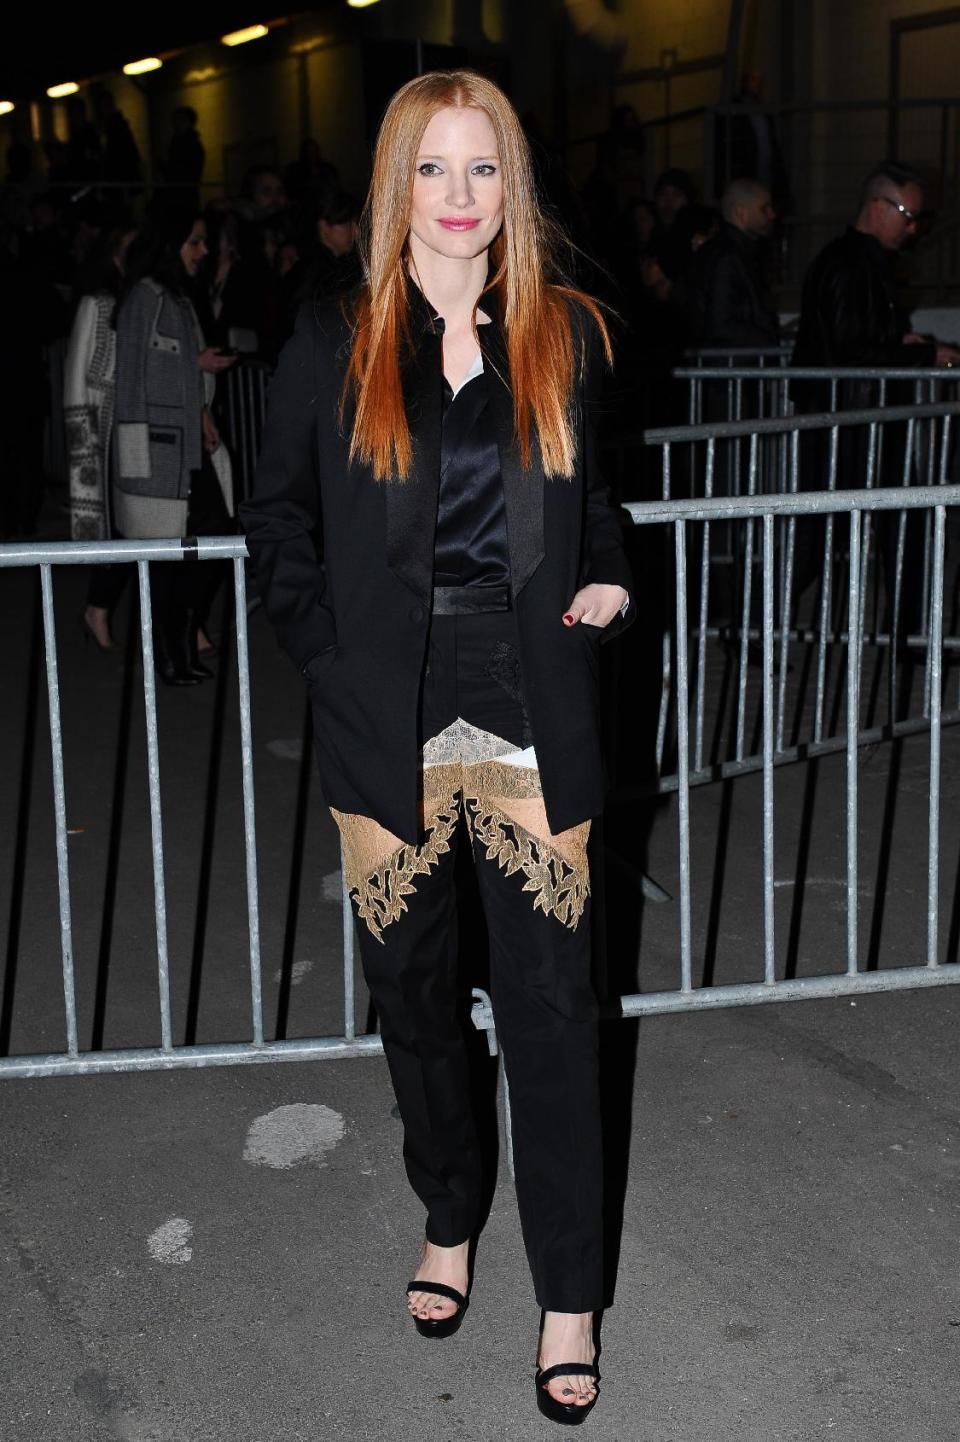 Actress Jessica Chastain arrives at Givenchy's Ready to Wear's Fall-Winter 2013-2014 fashion collection presented Sunday, March 3, 2013 in Paris. (AP Photo/Zacharie Scheurer)